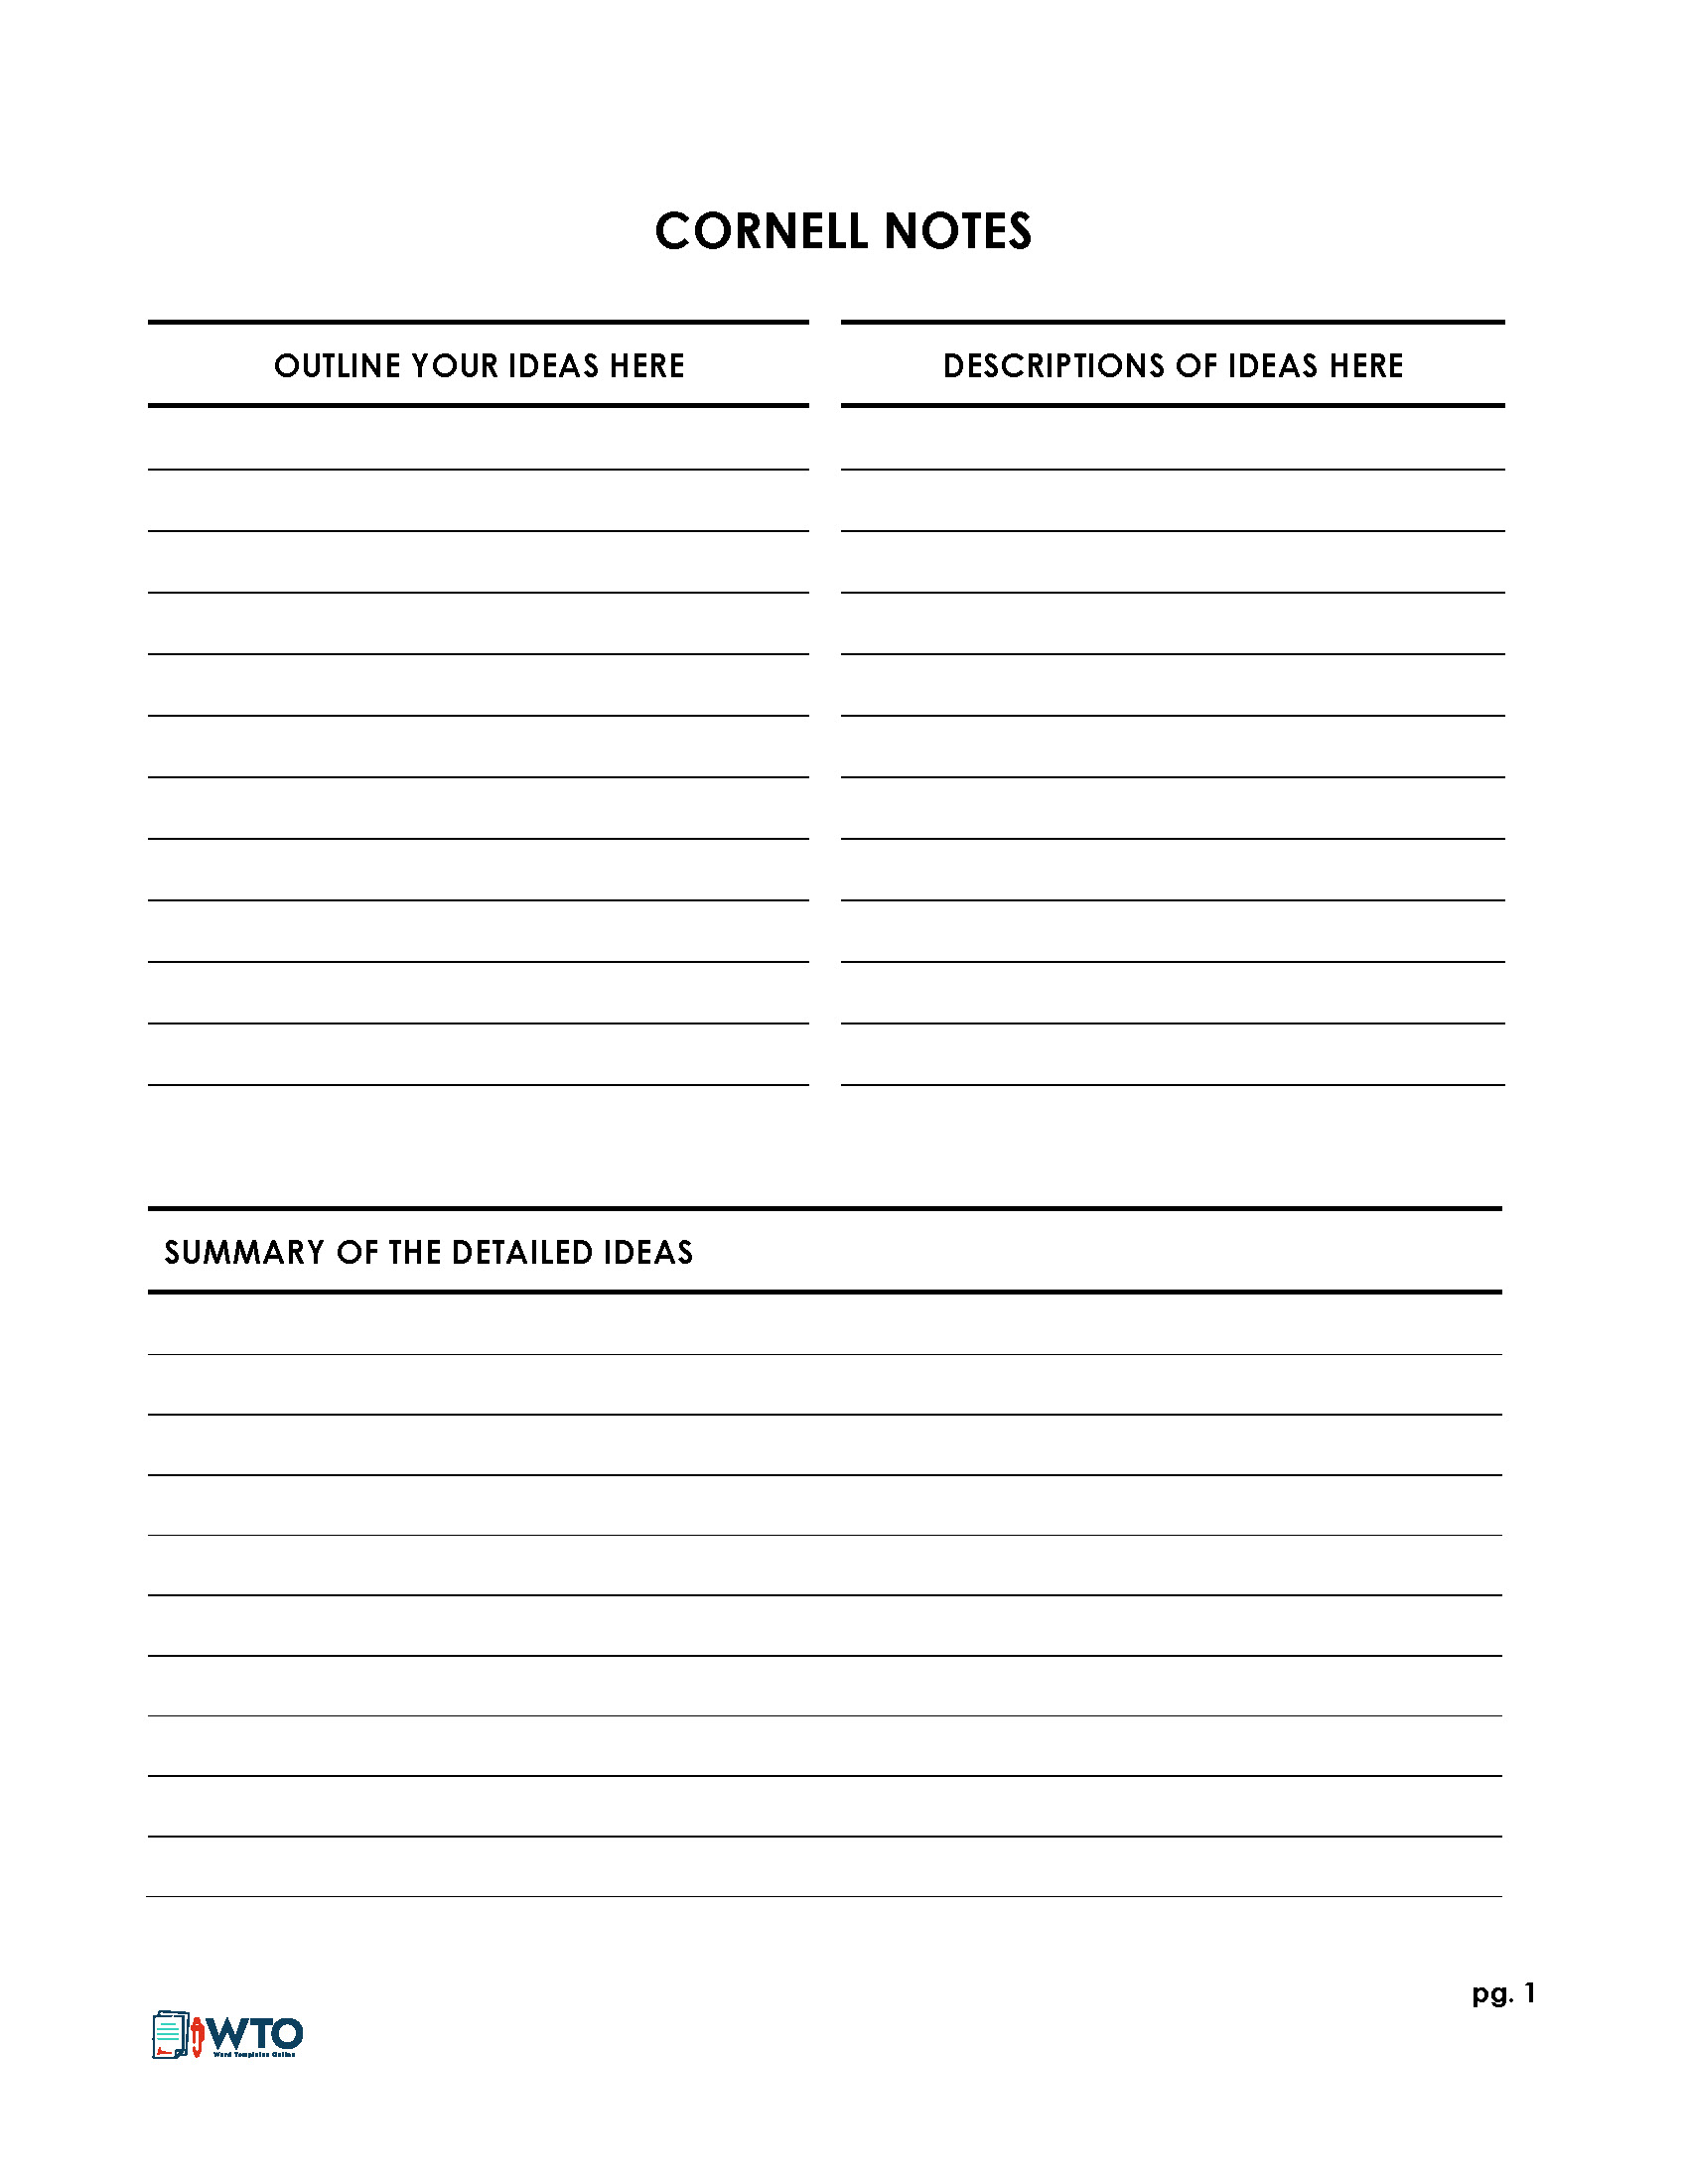 Free Cornell Note Template Sample Excel